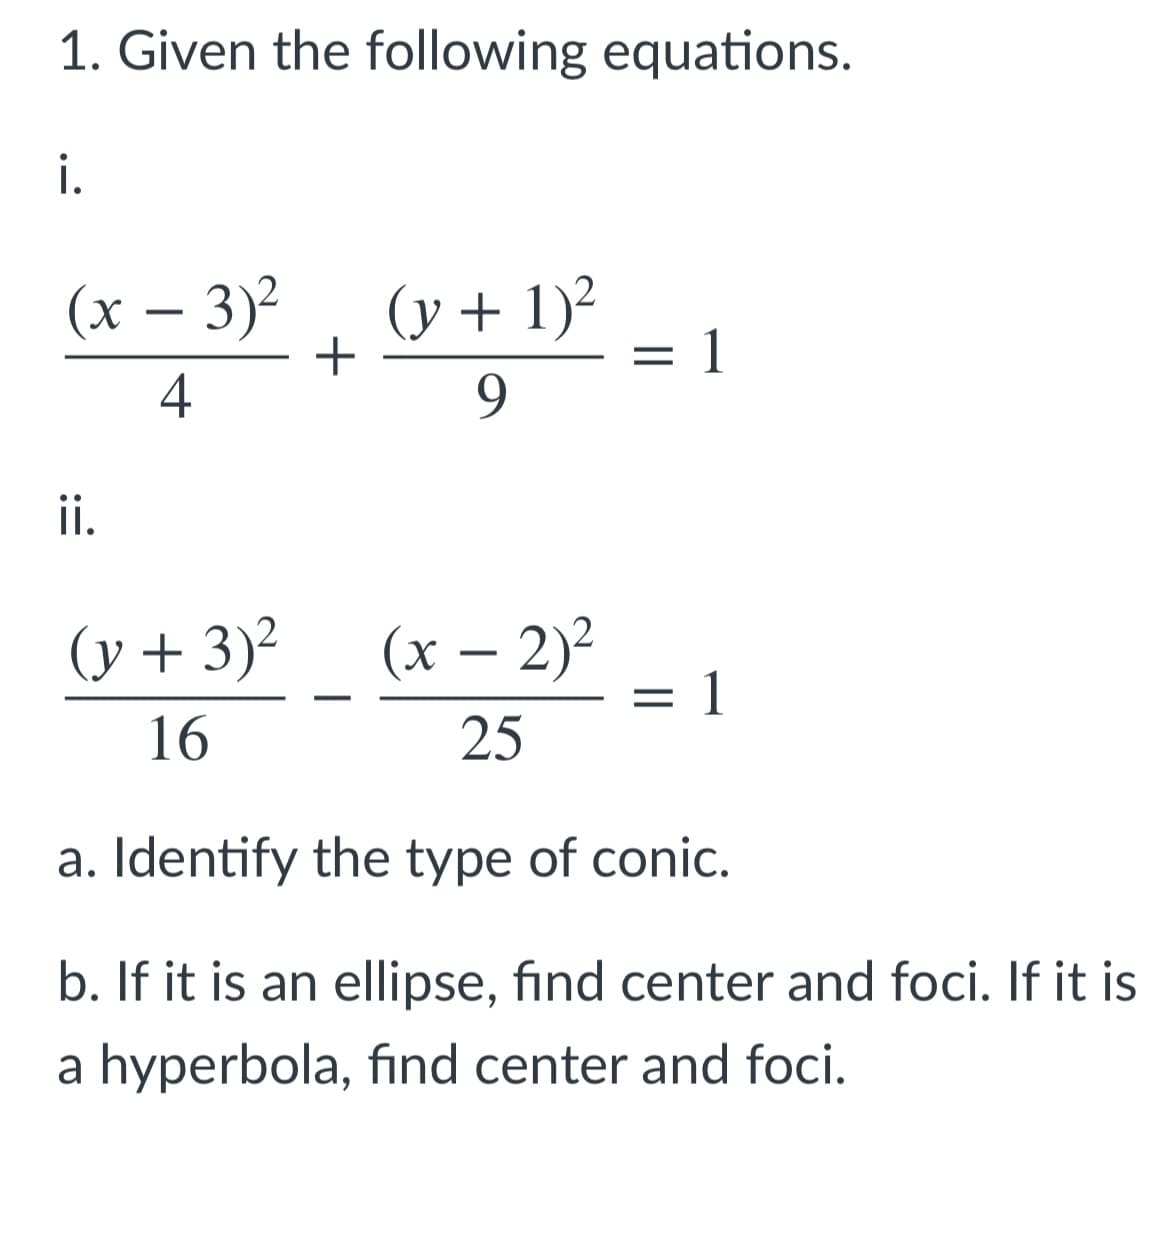 1. Given the following equations.
i.
(x – 3)?
(y + 1)²
1
-
4
9.
i.
(y + 3)2
(x – 2)?
1
-
:
16
25
a. Identify the type of conic.
b. If it is an ellipse, find center and foci. If it is
a hyperbola, find center and foci.
